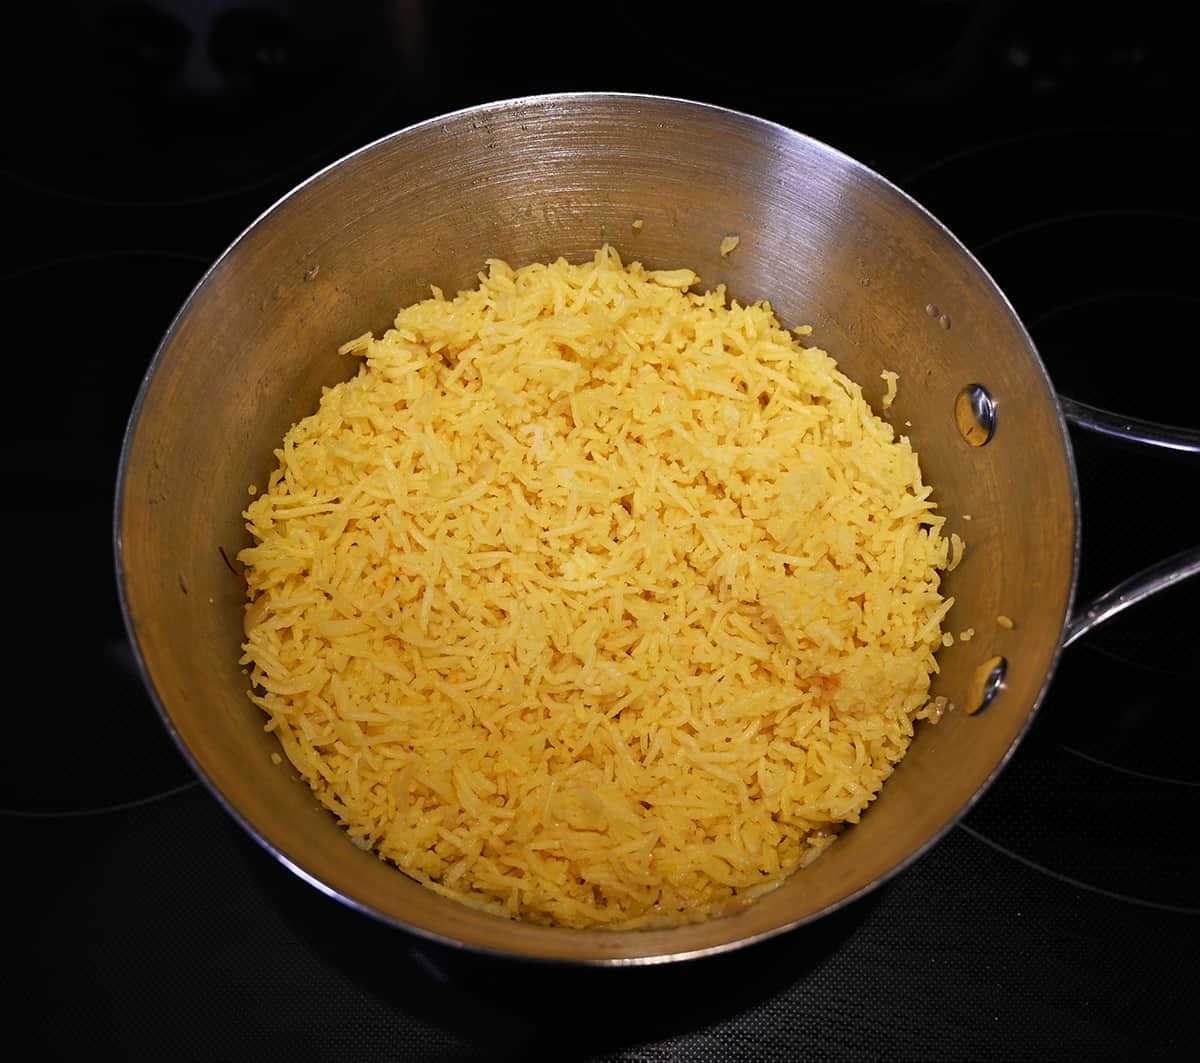 Top down image of a full pot of cooked rice.